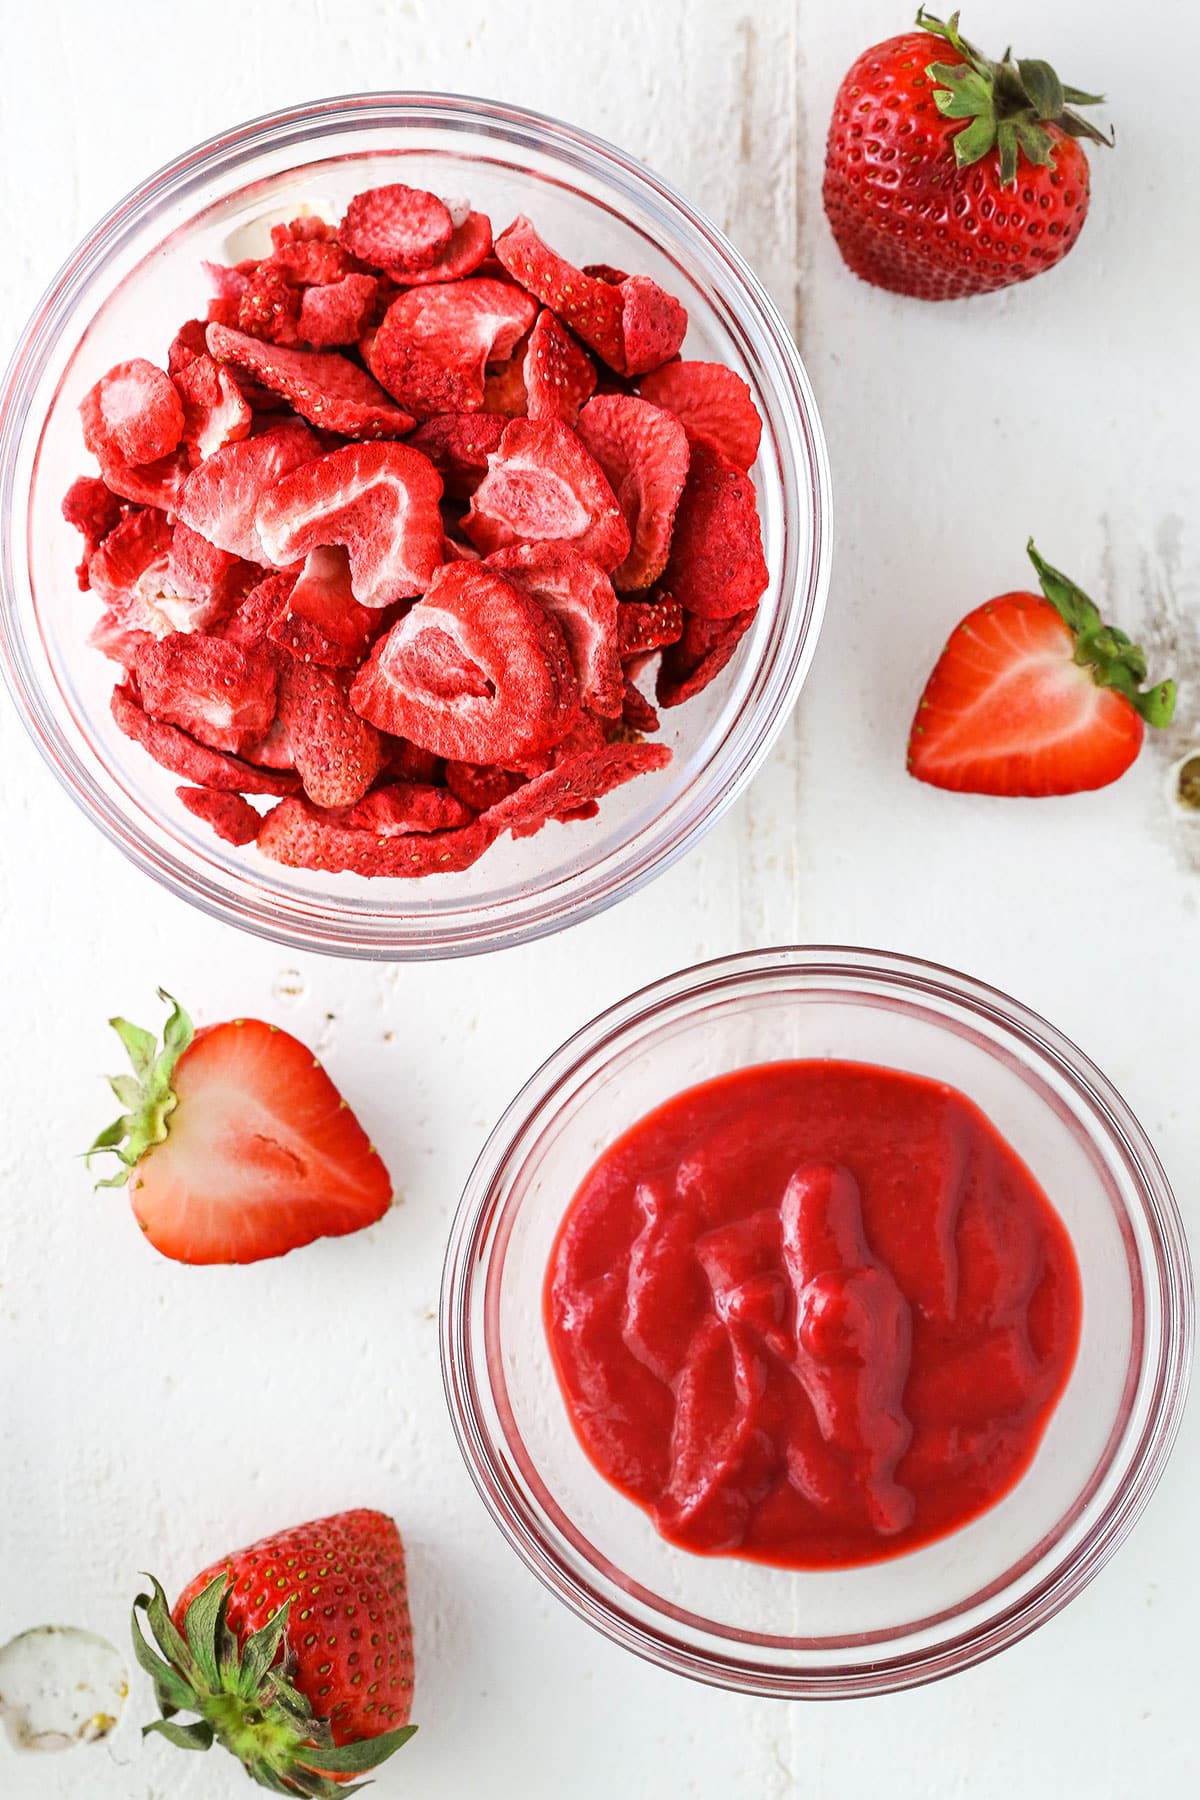 Overhead view of sliced strawberries in a clear glass bowl and pureed strawberries in a clear glass bowl